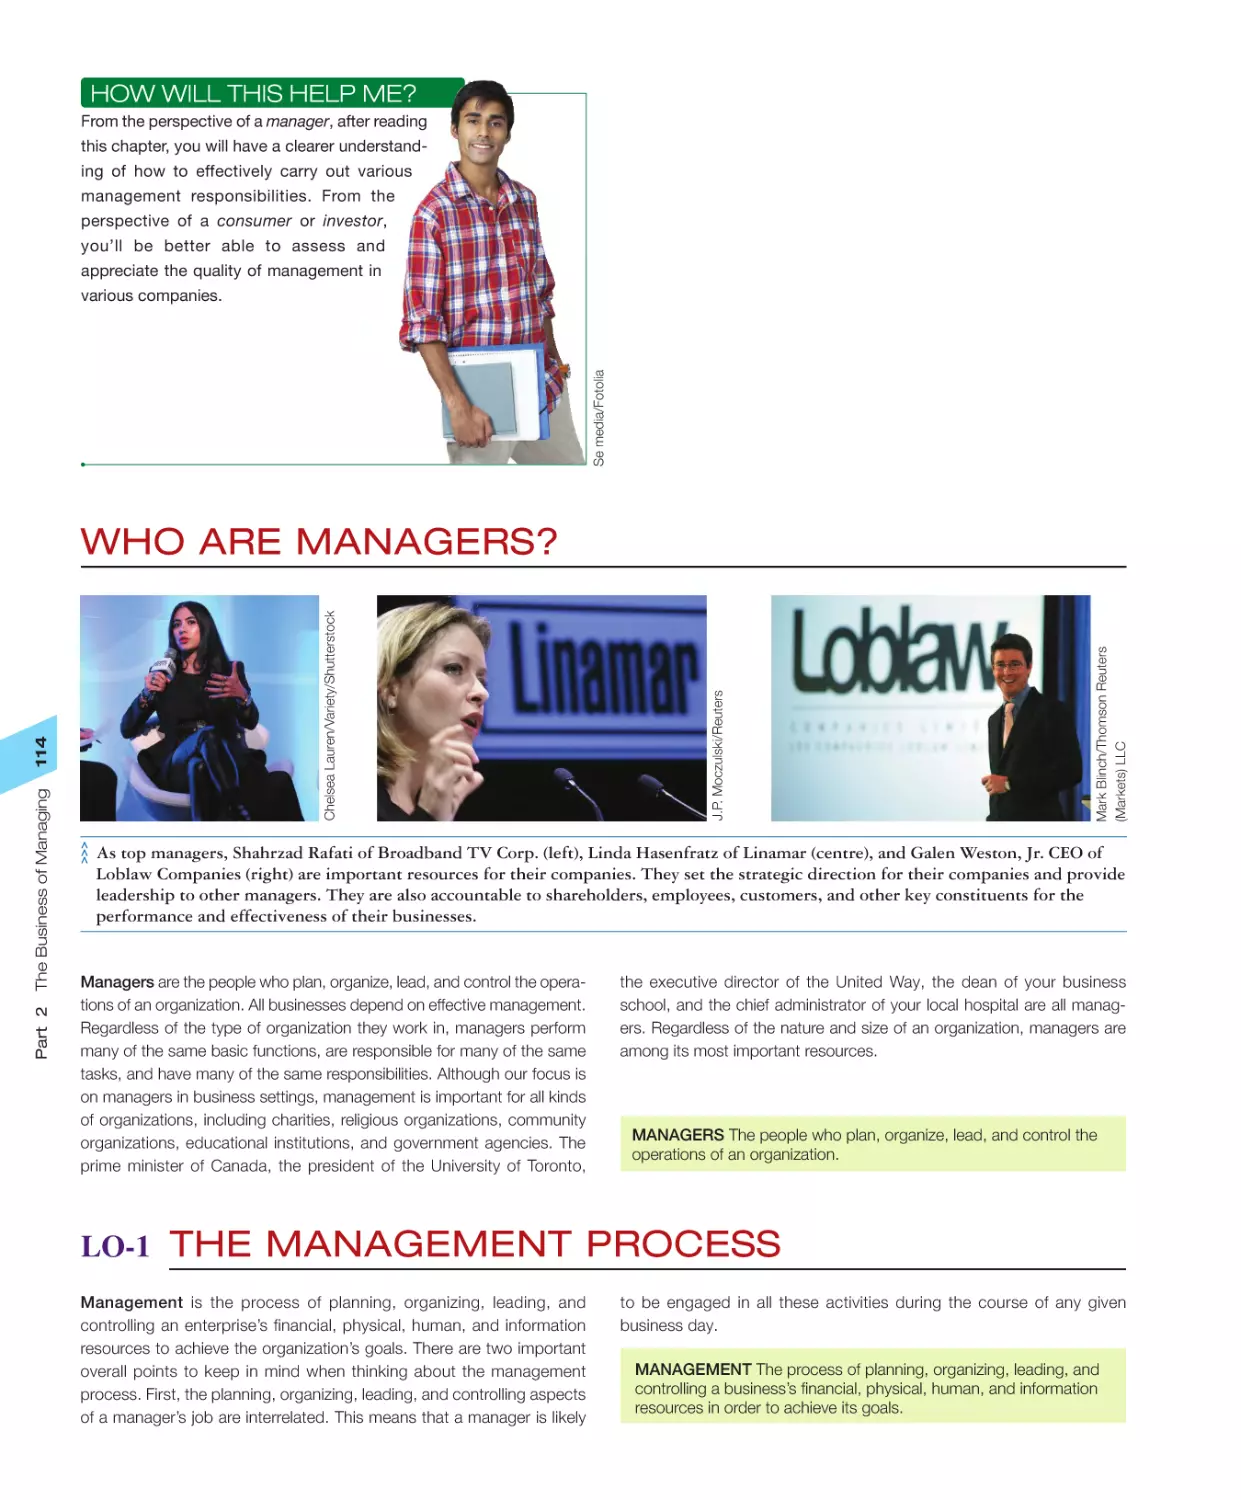 Who Are Managers?
LO‐1 The Management Process